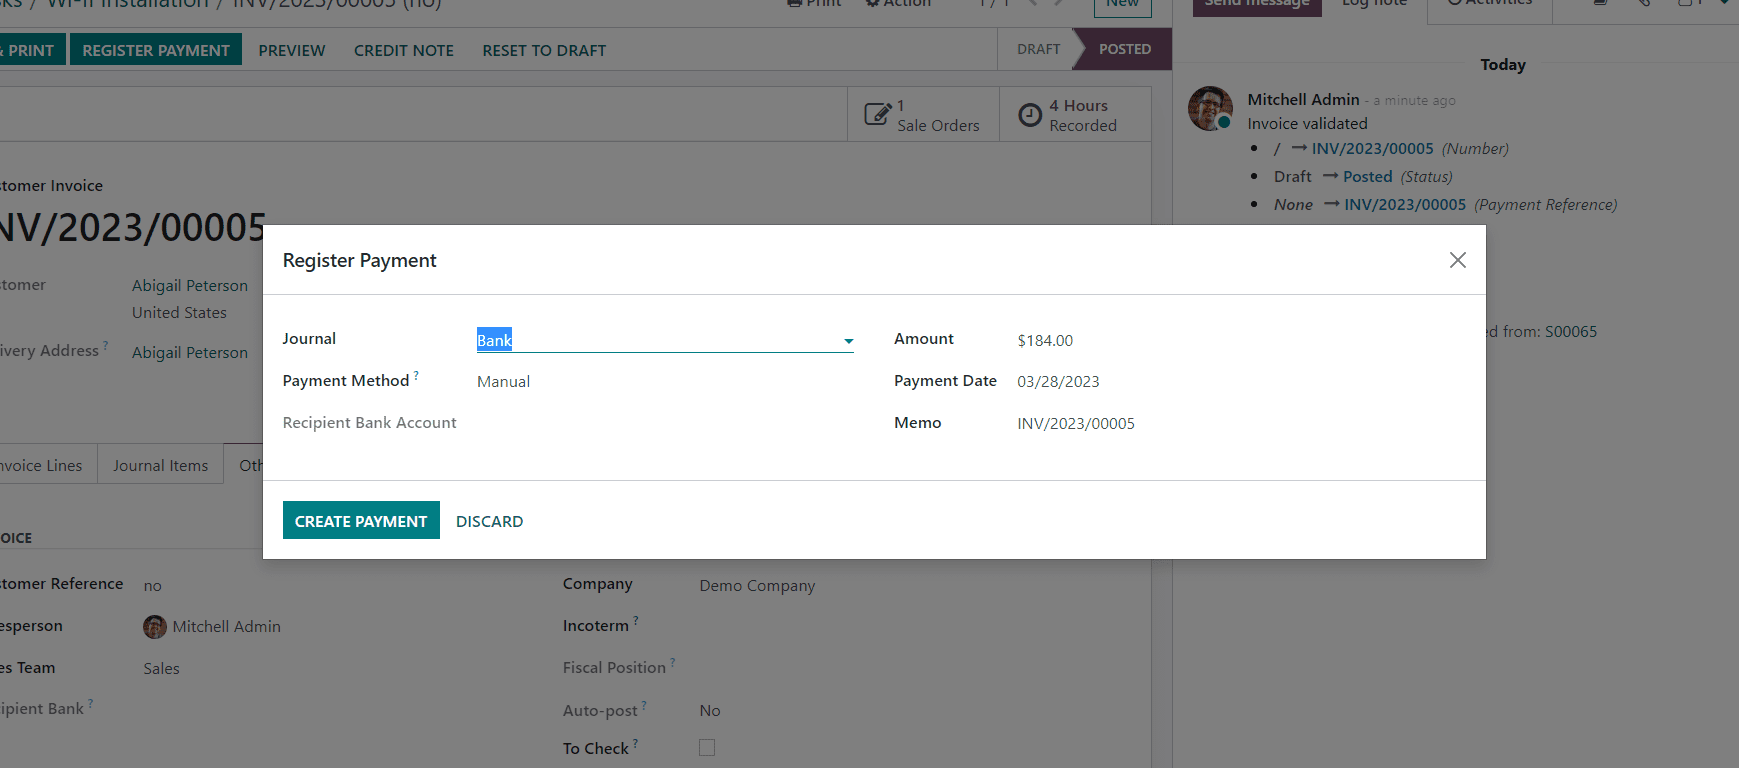 How To Schedule a Task in Odoo Field Services